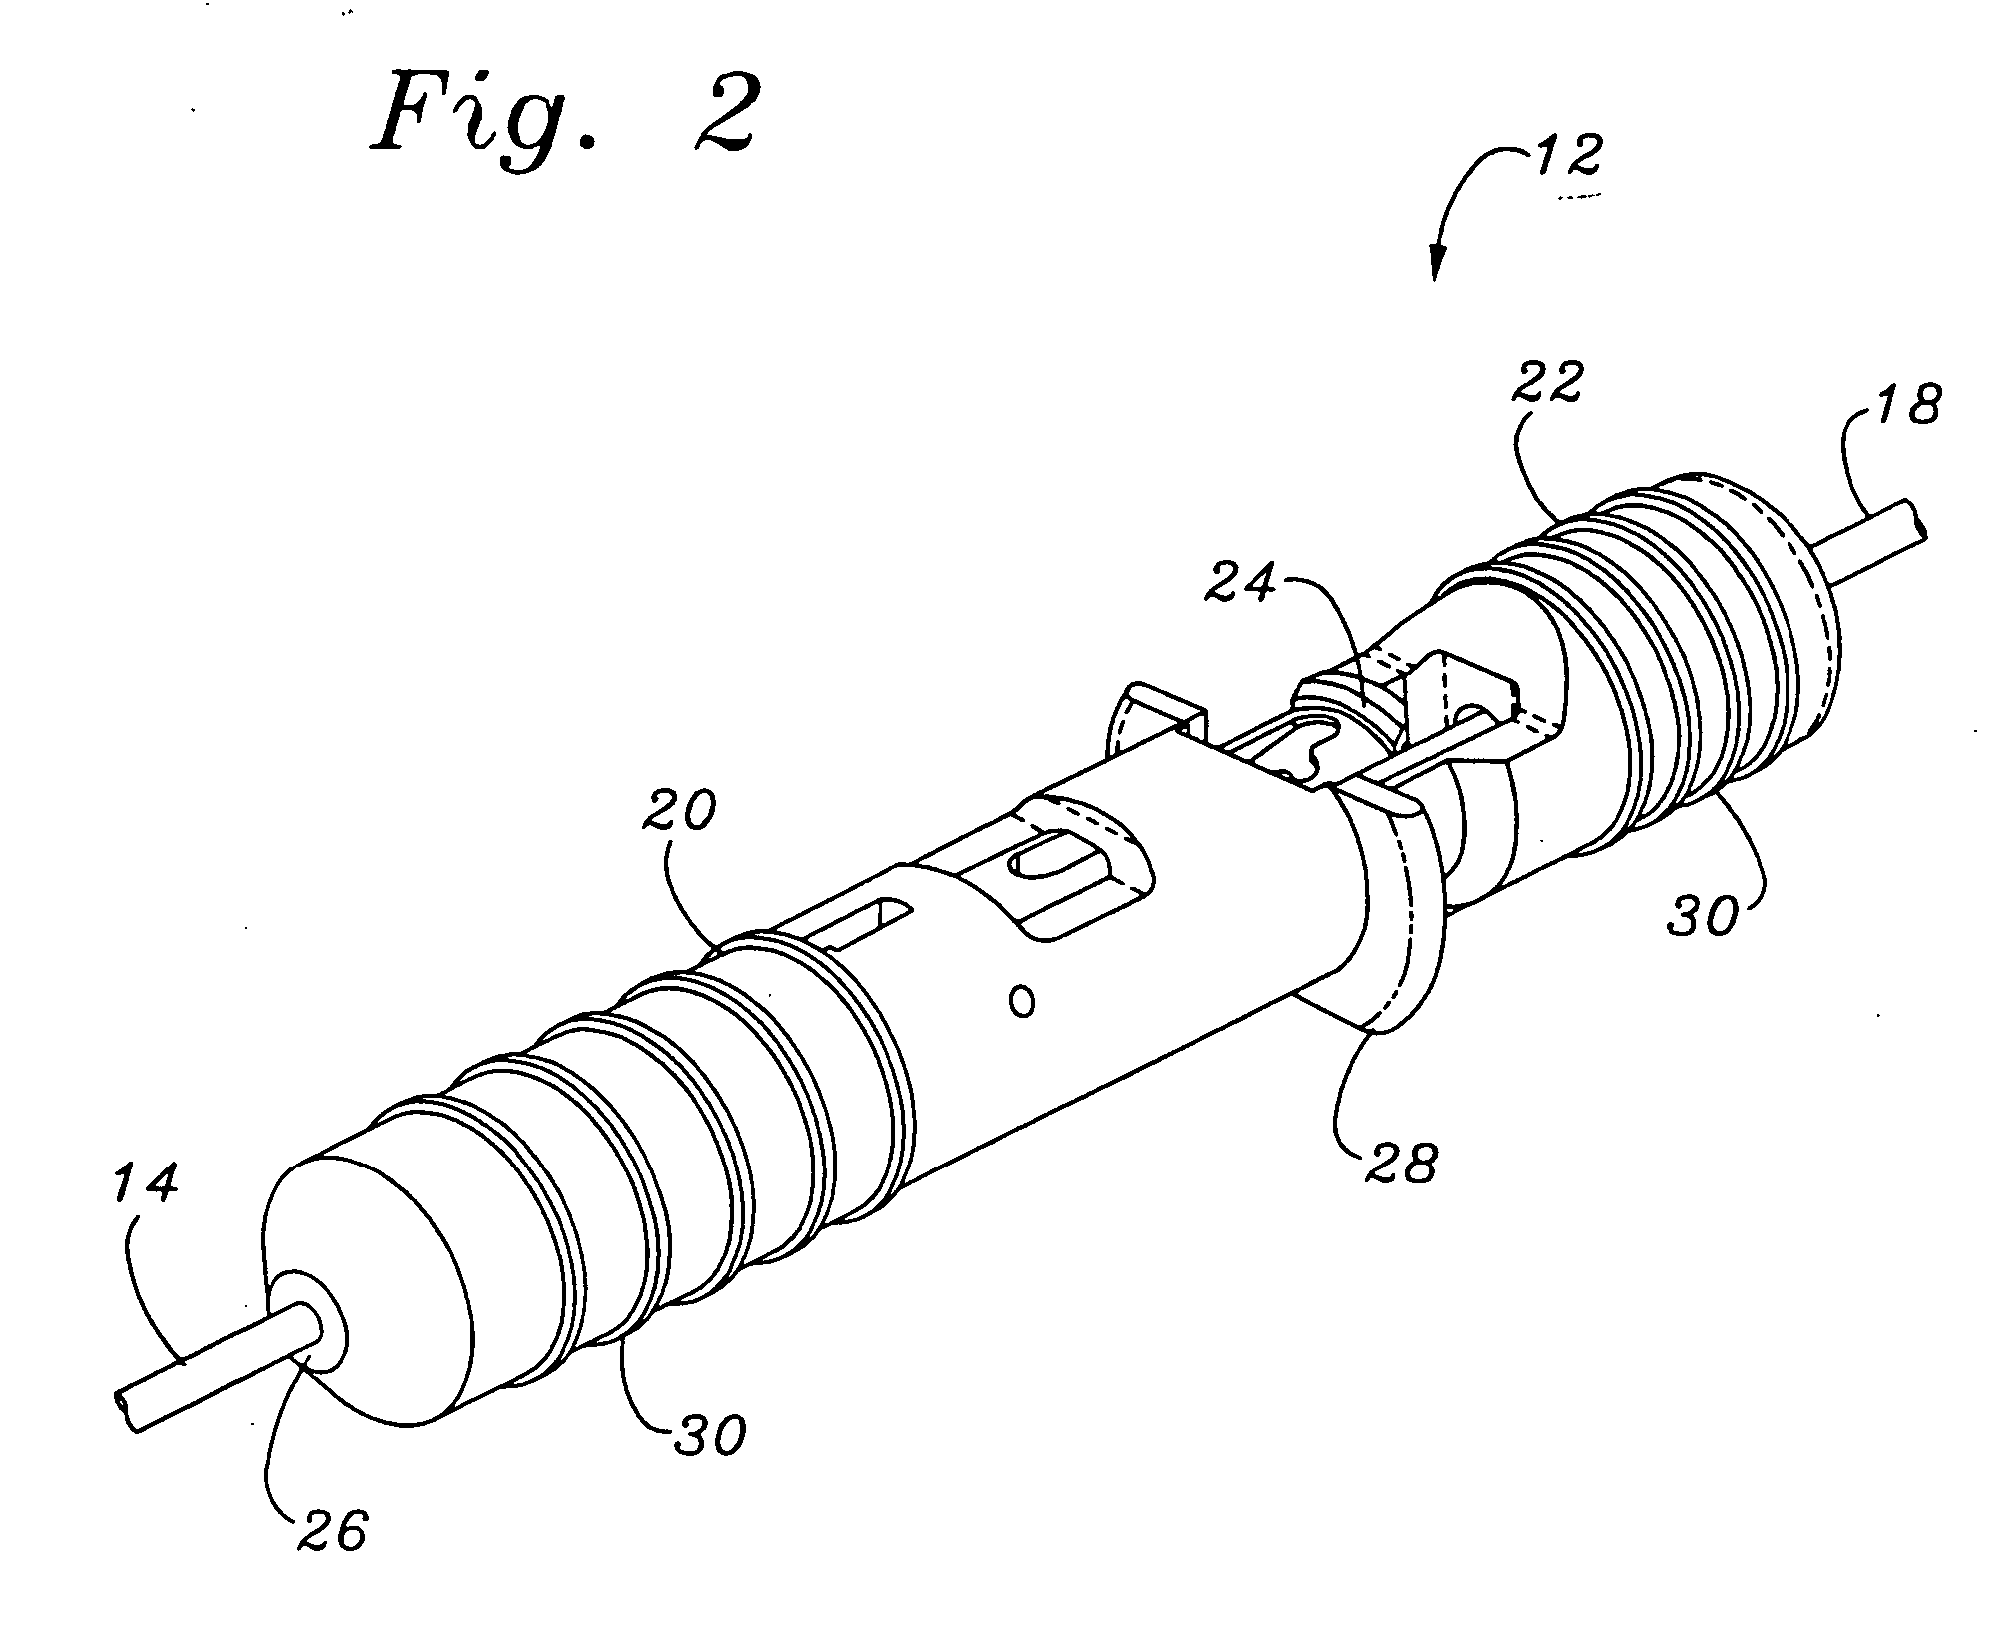 Single catheter mitral valve repair device and method for use